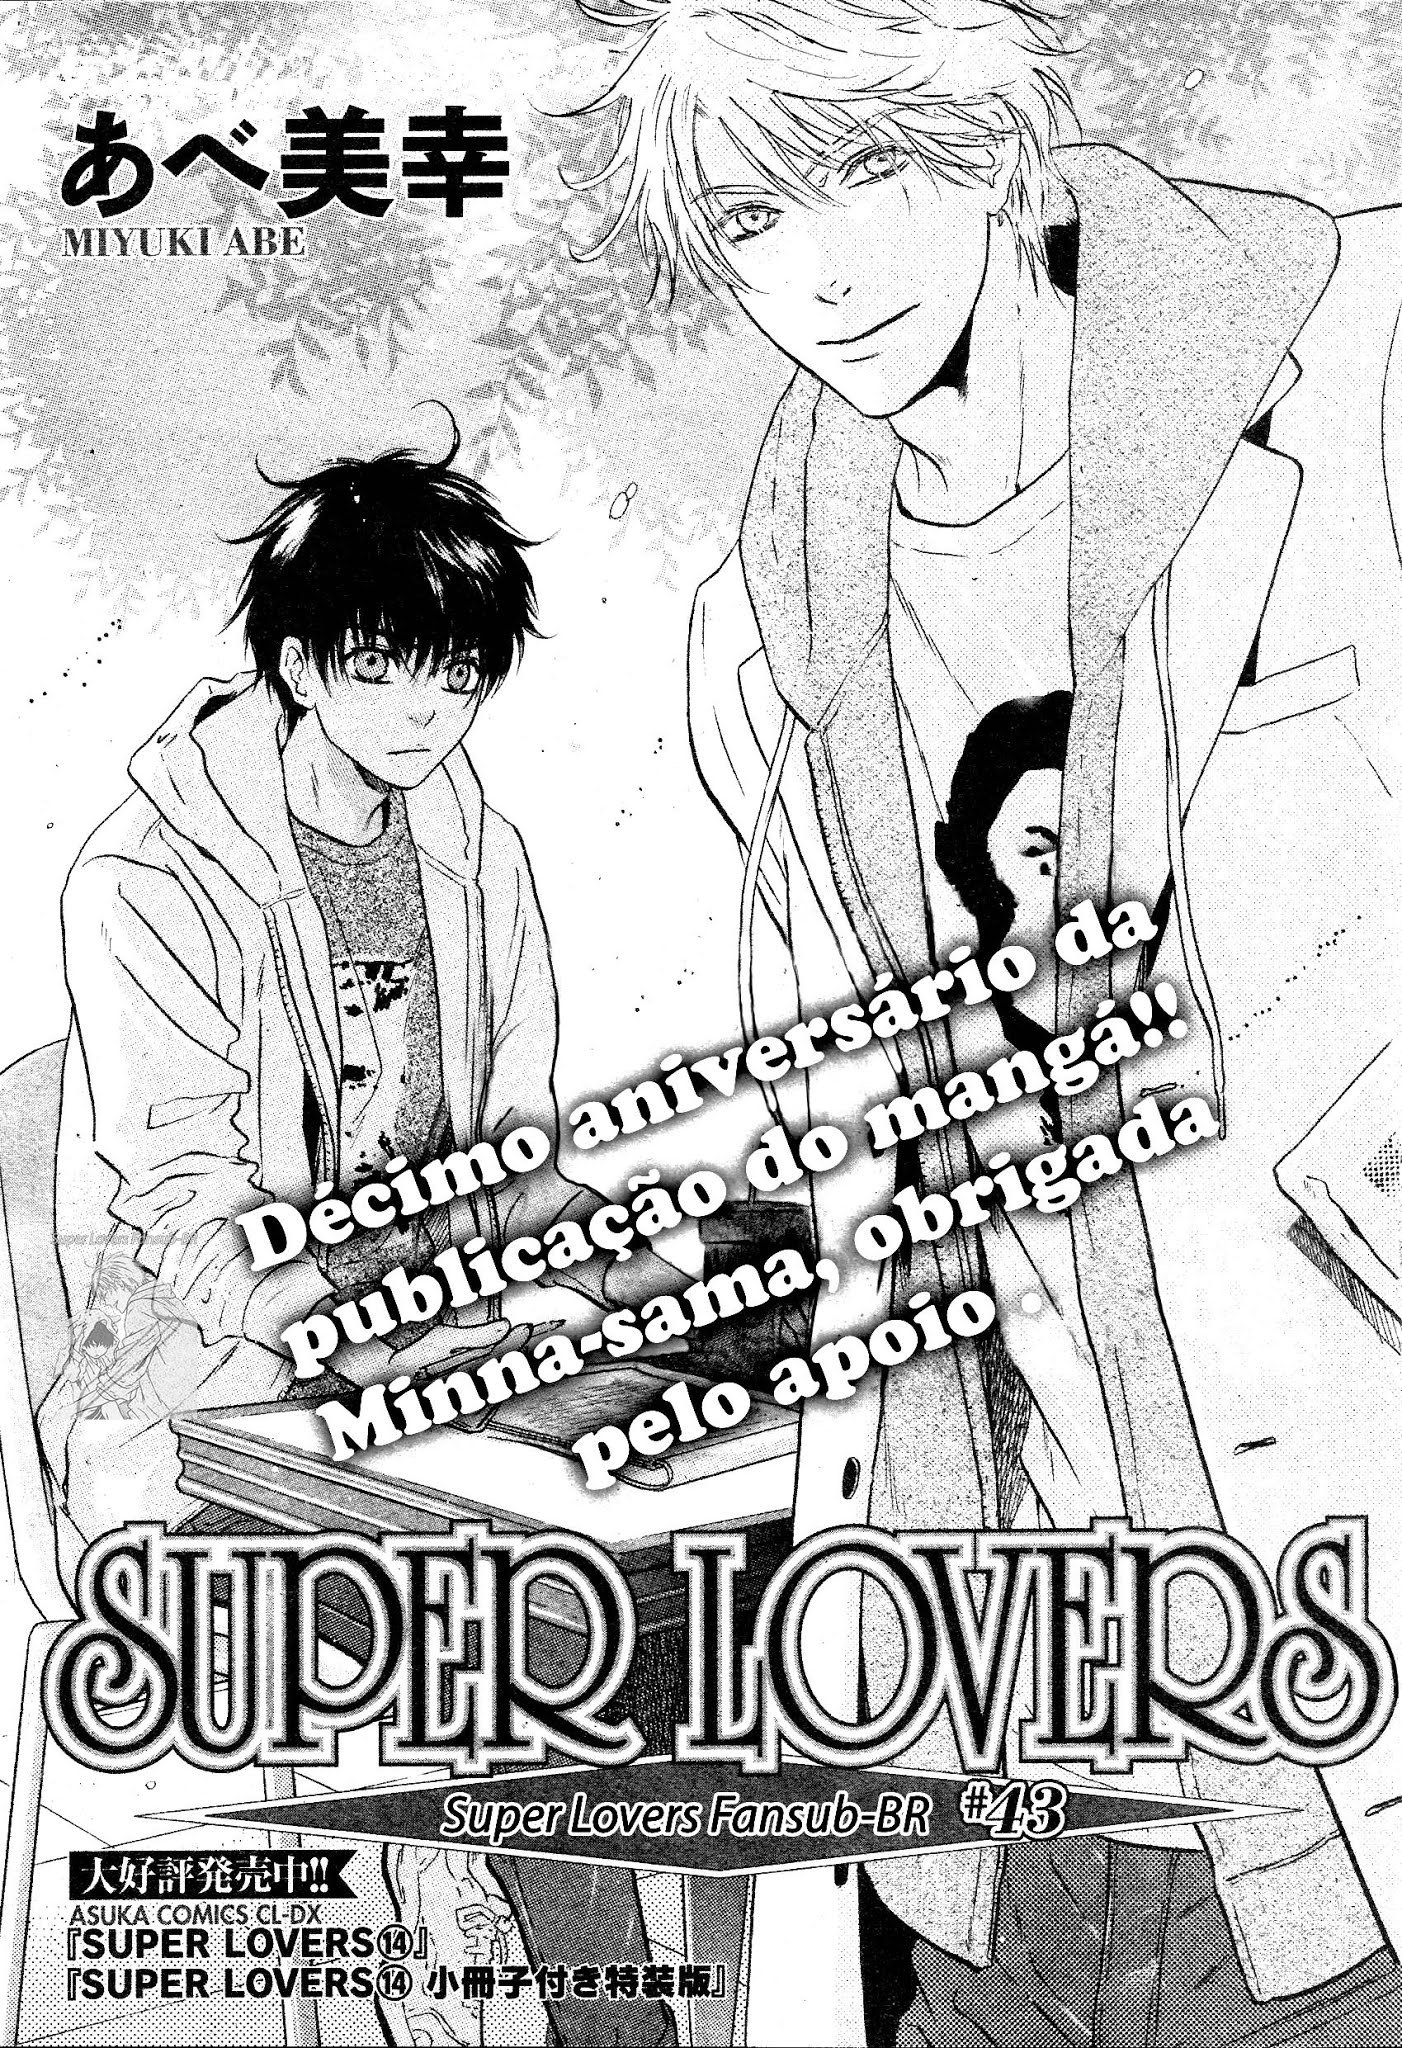 Super Lovers Fansub Br Capitulo 43